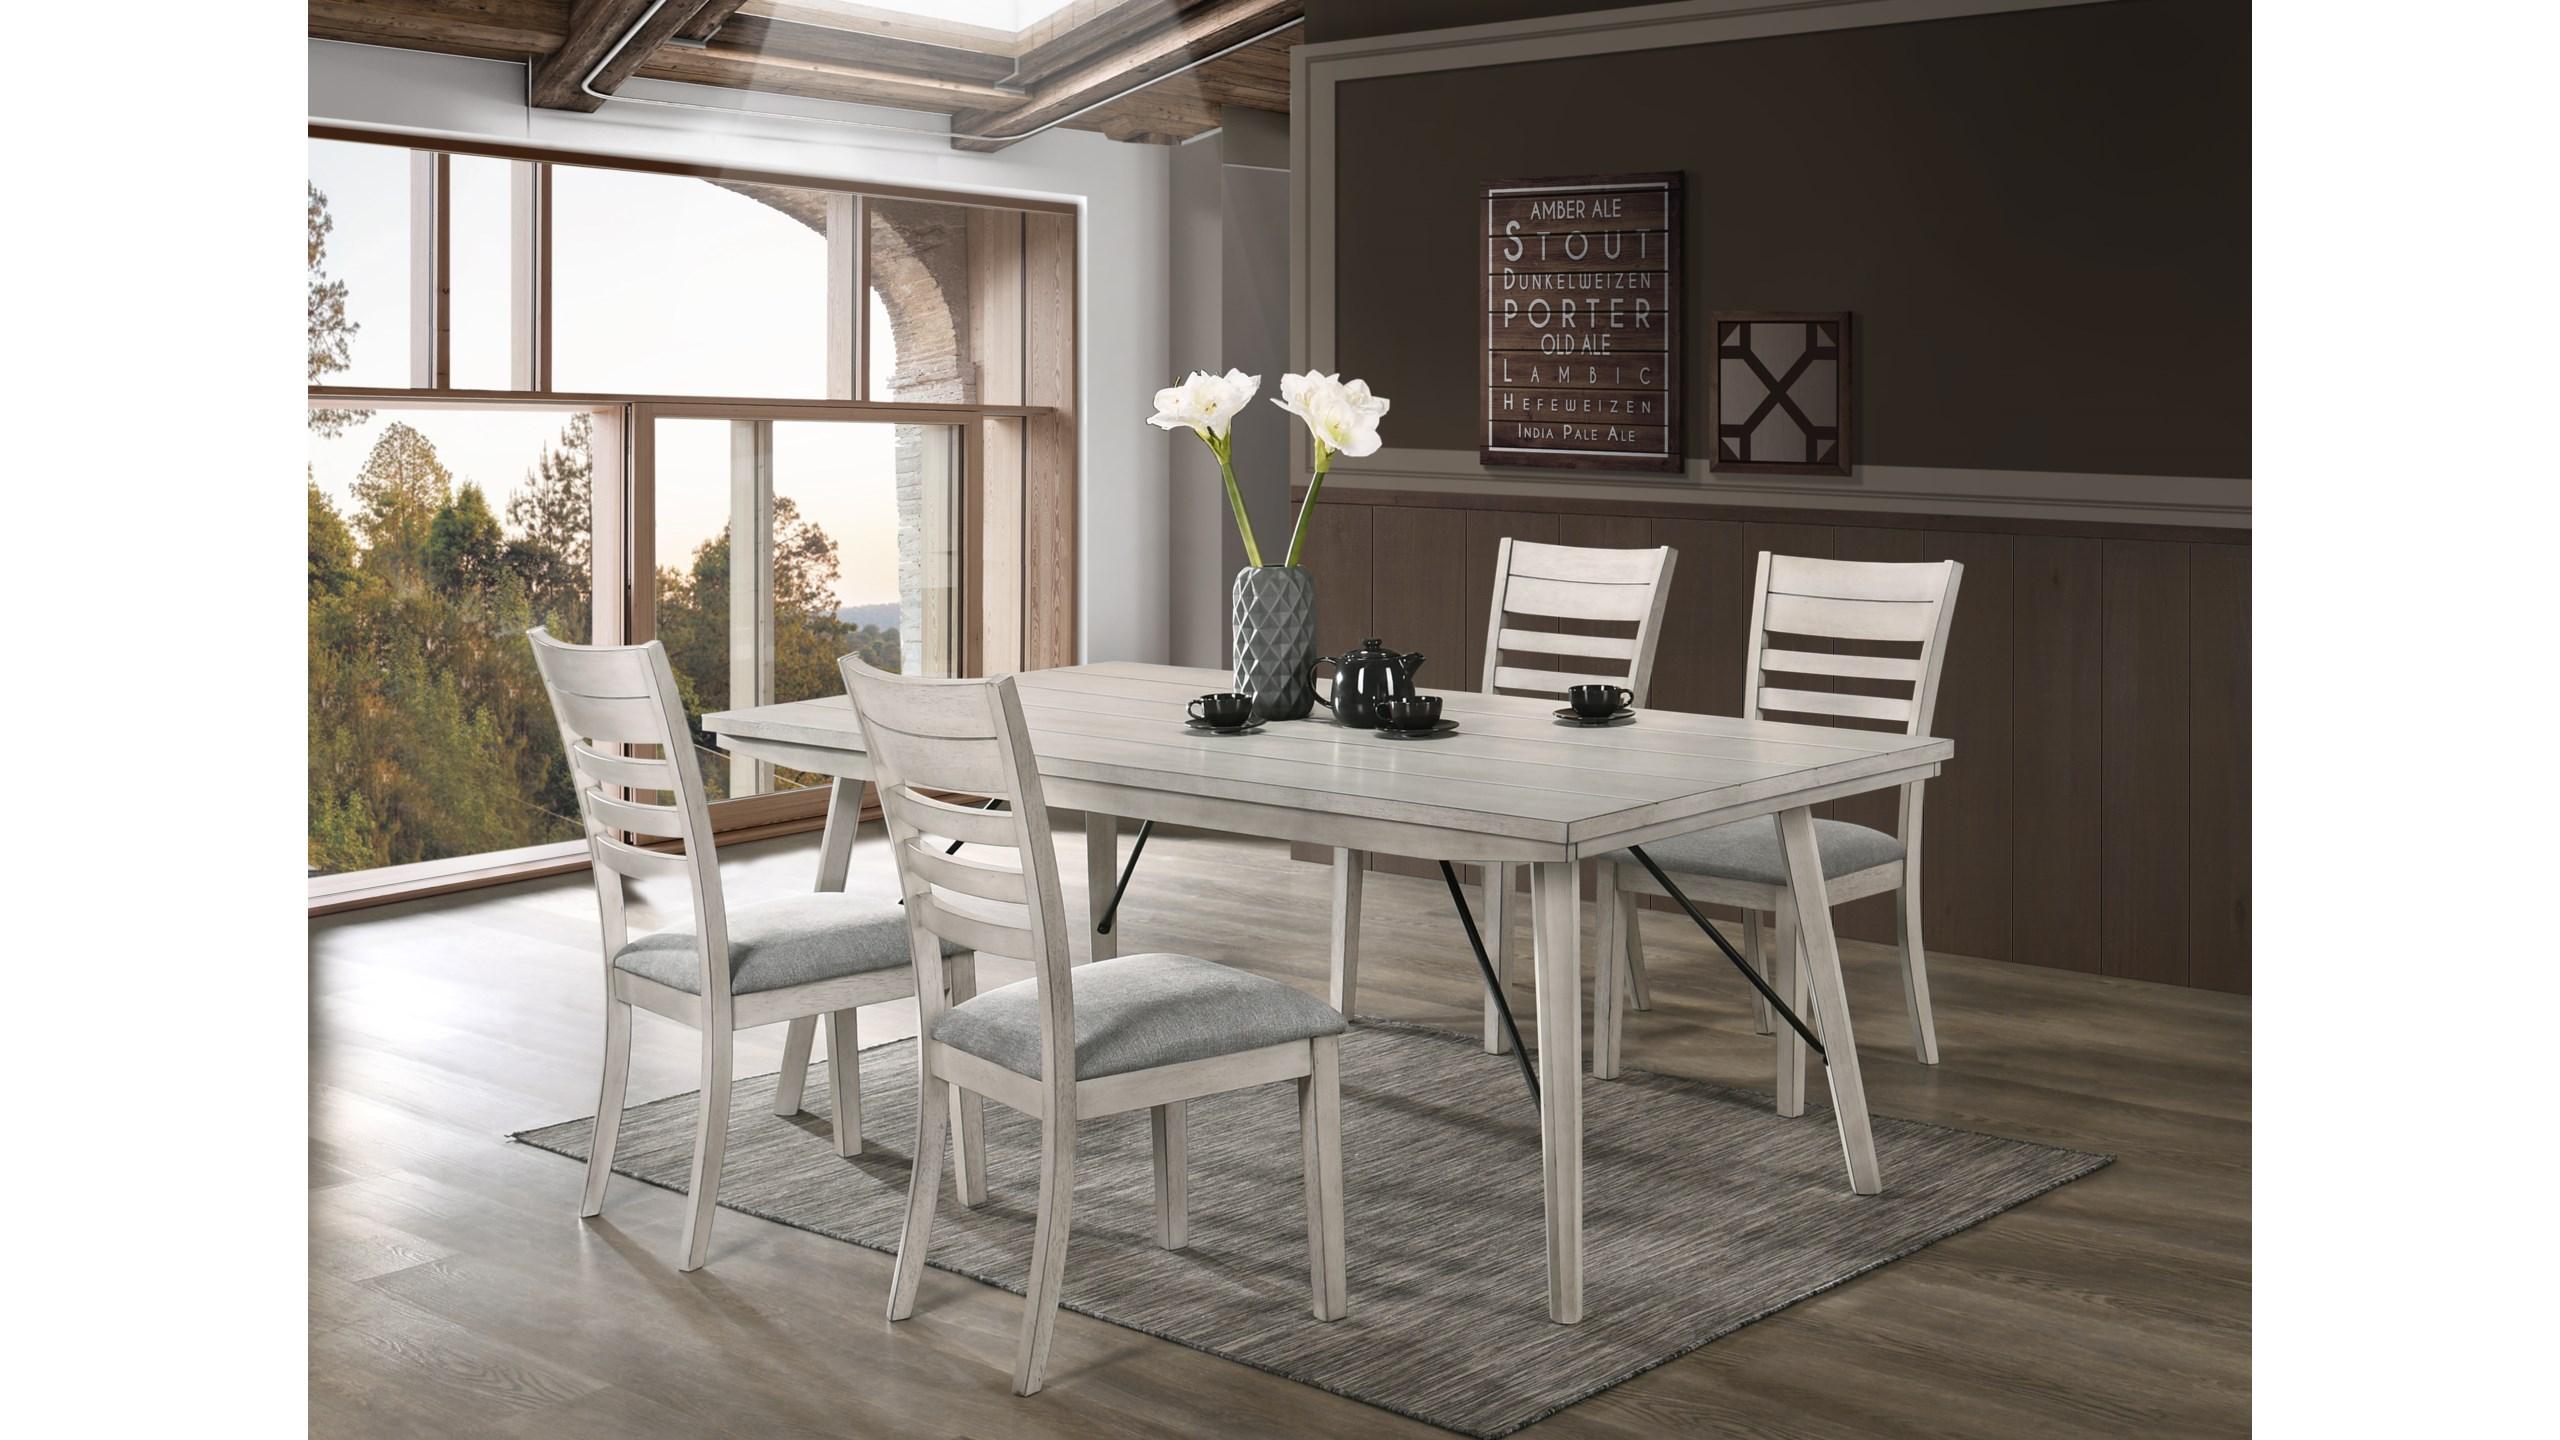 

    
Light Gray & Vintage White Dining Table + 4 Chairs by Crown Mark White Sands 2132T-4079-5pcs
